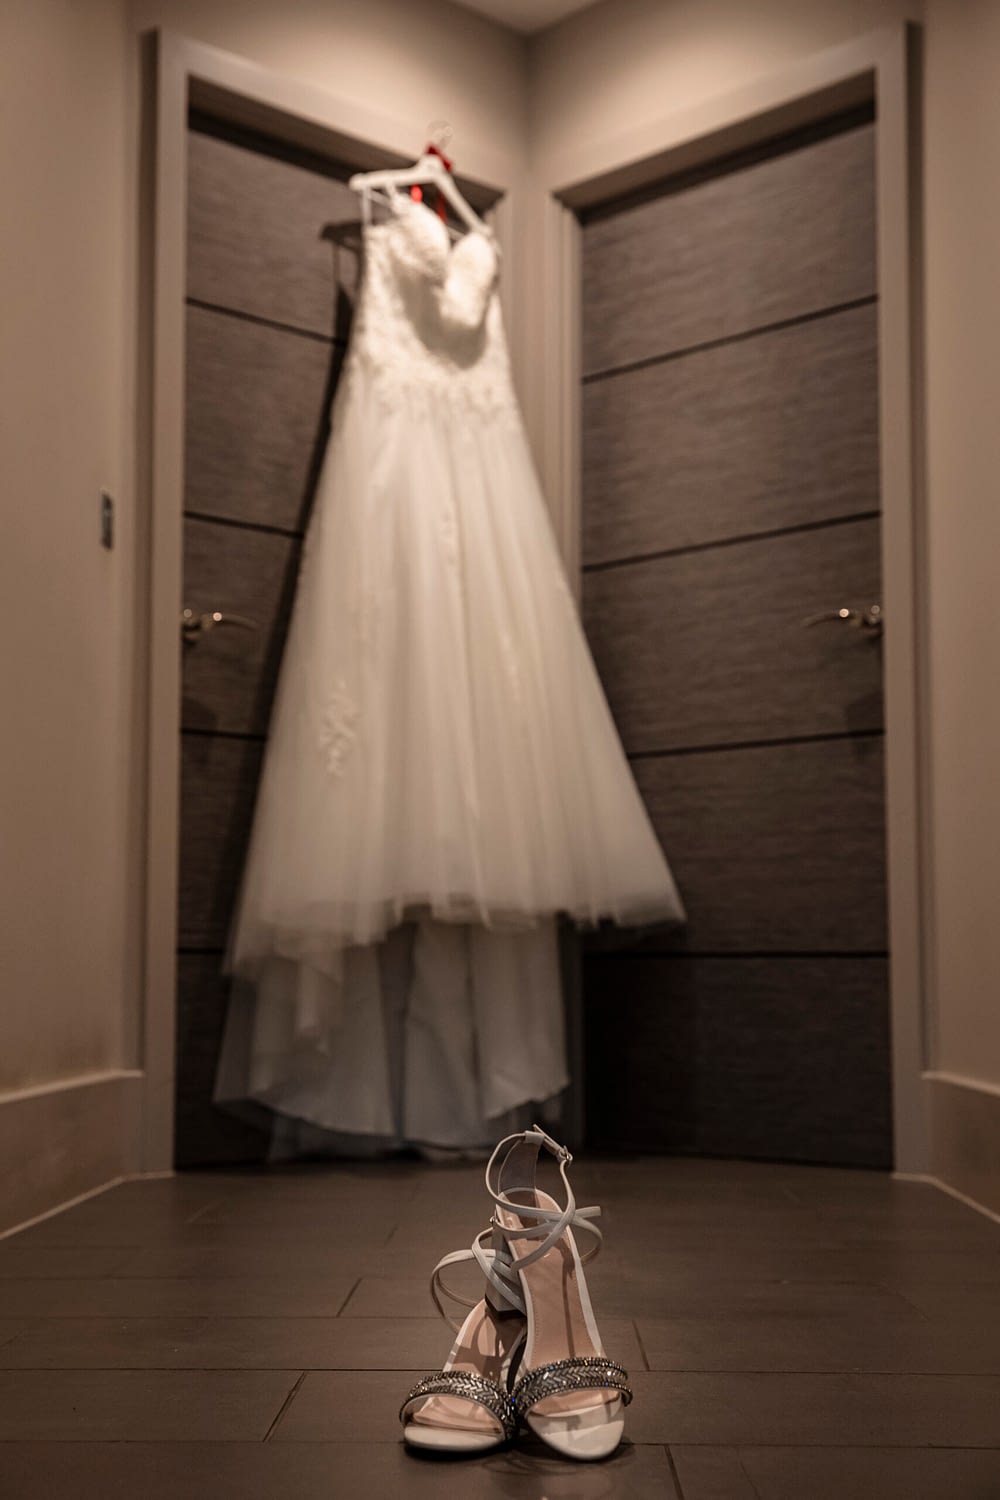 wedding dress hanging up with shoes on floor